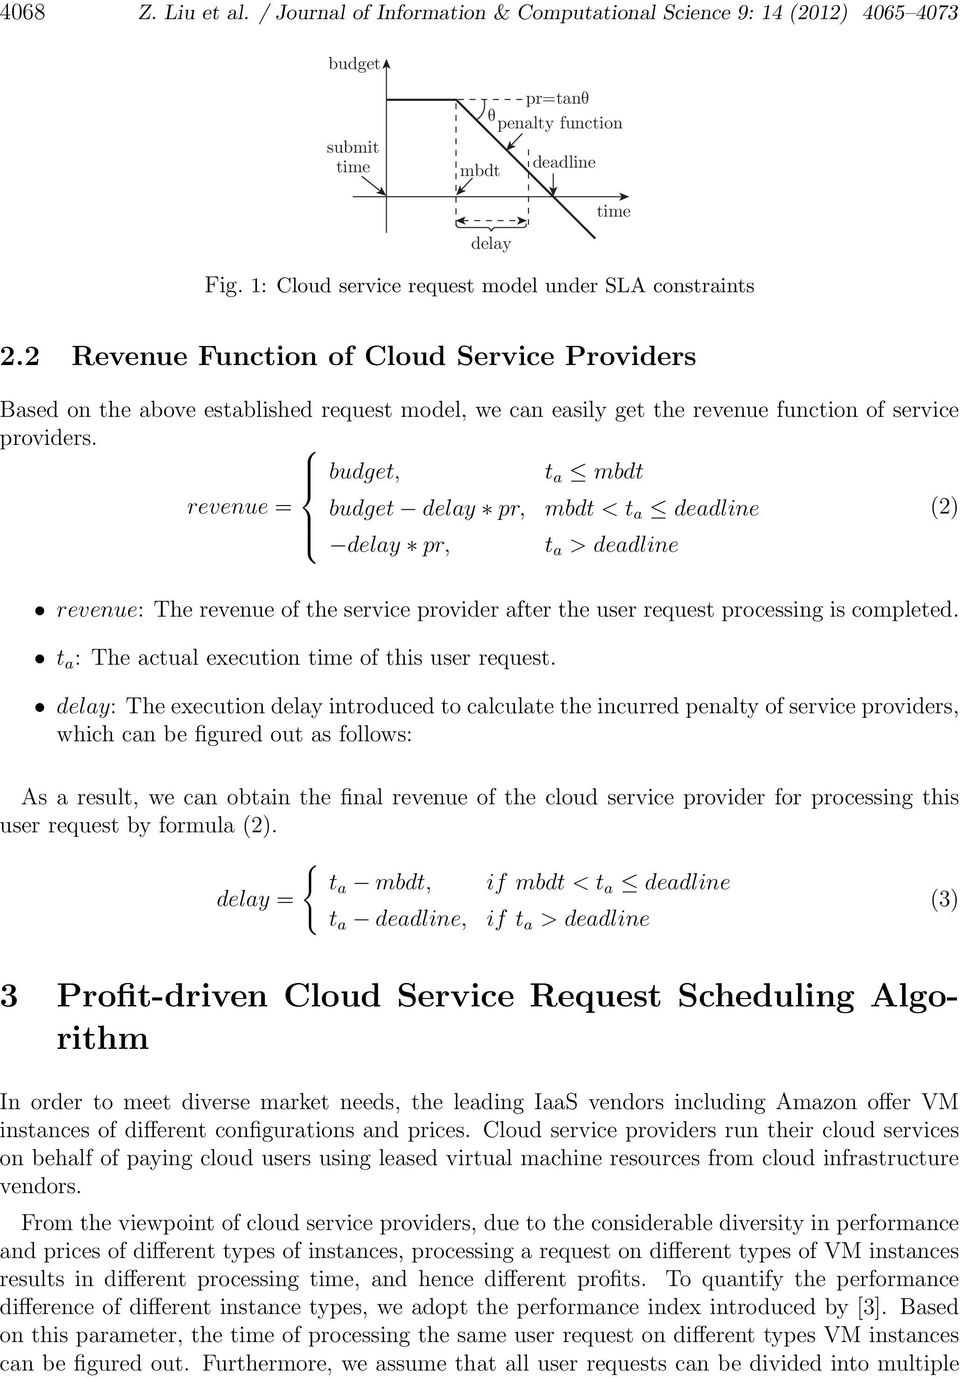 2 Revenue Function of Cloud Service Providers Based on the above established request model, we can easily get the revenue function of service providers.